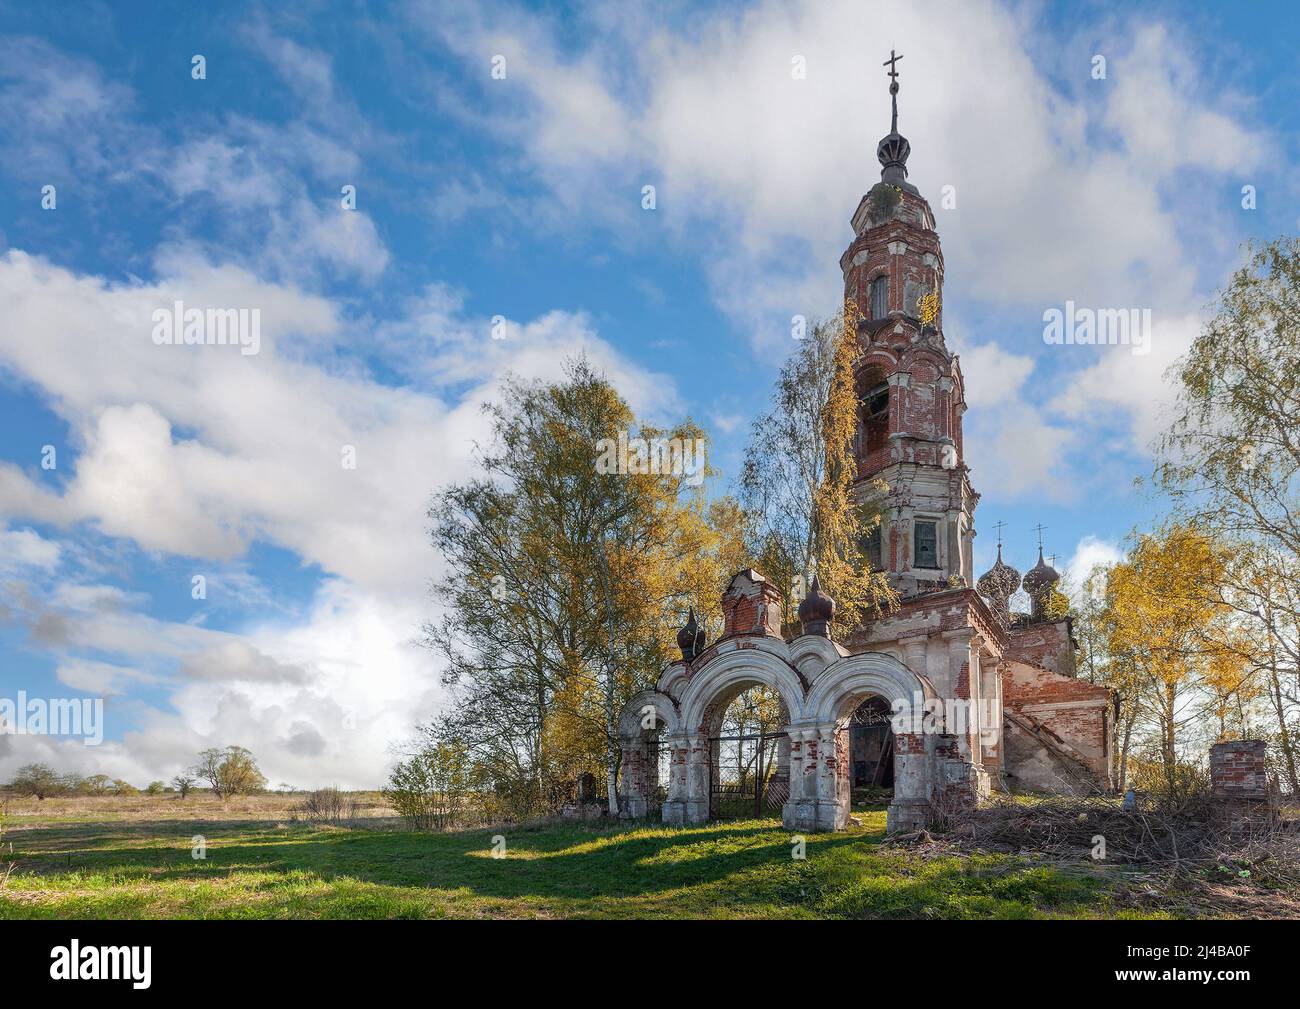 Abandoned old Russian church in the countryside Stock Photo